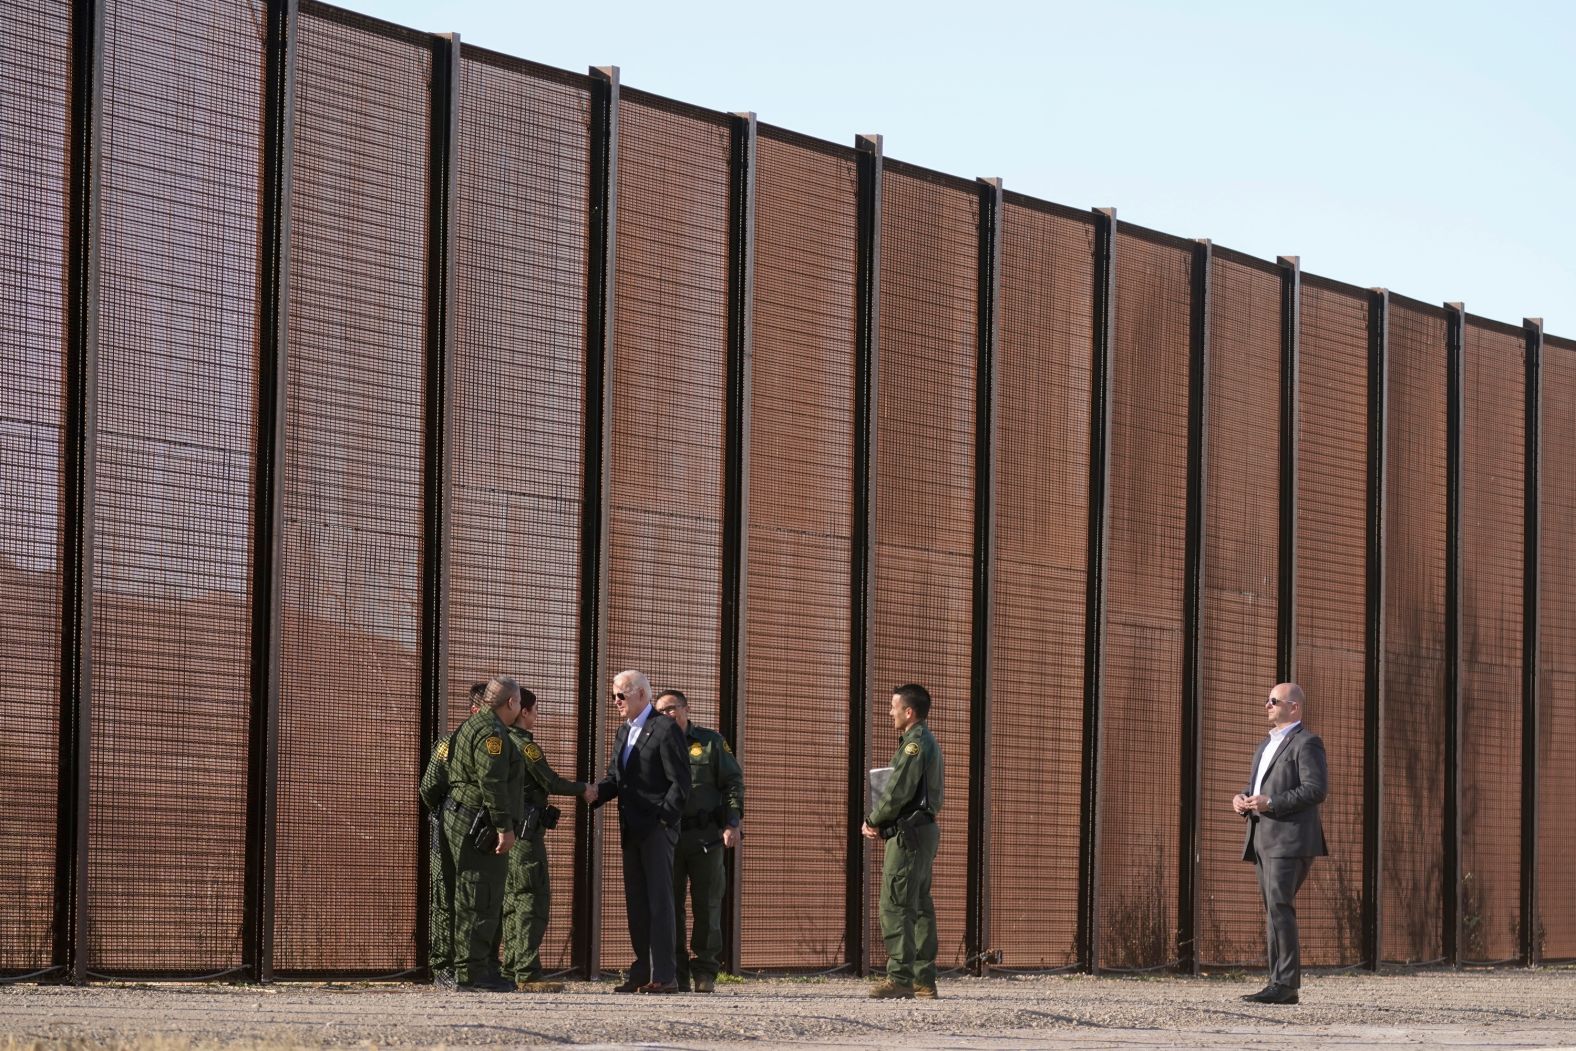 US President Joe Biden greets Border Patrol agents near the Mexican border in El Paso, Texas, on Sunday, January 8. He was making <a href="index.php?page=&url=https%3A%2F%2Fwww.cnn.com%2F2023%2F01%2F08%2Fpolitics%2Fjoe-biden-border%2Findex.html" target="_blank">his first visit to the southern border as president</a>.